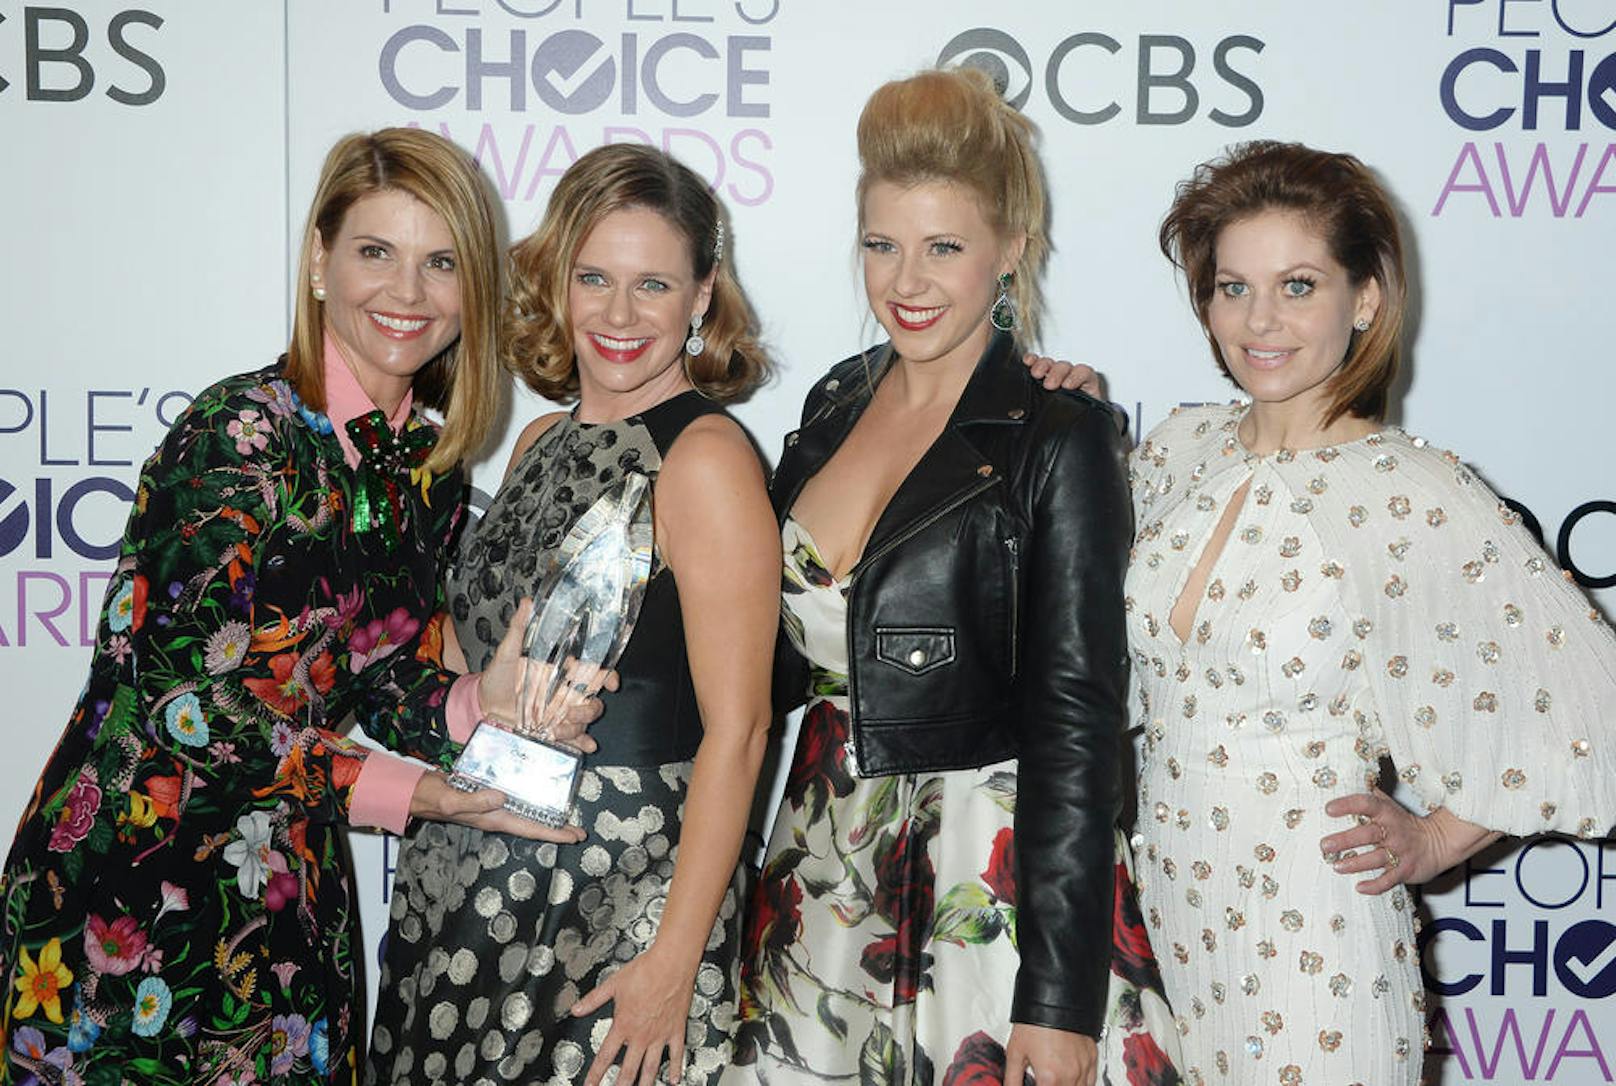 Die "Fuller House"-Stars Lori Loughlin, Andrea Barber, Jodie Sweetin and Candace Cameron-Bure